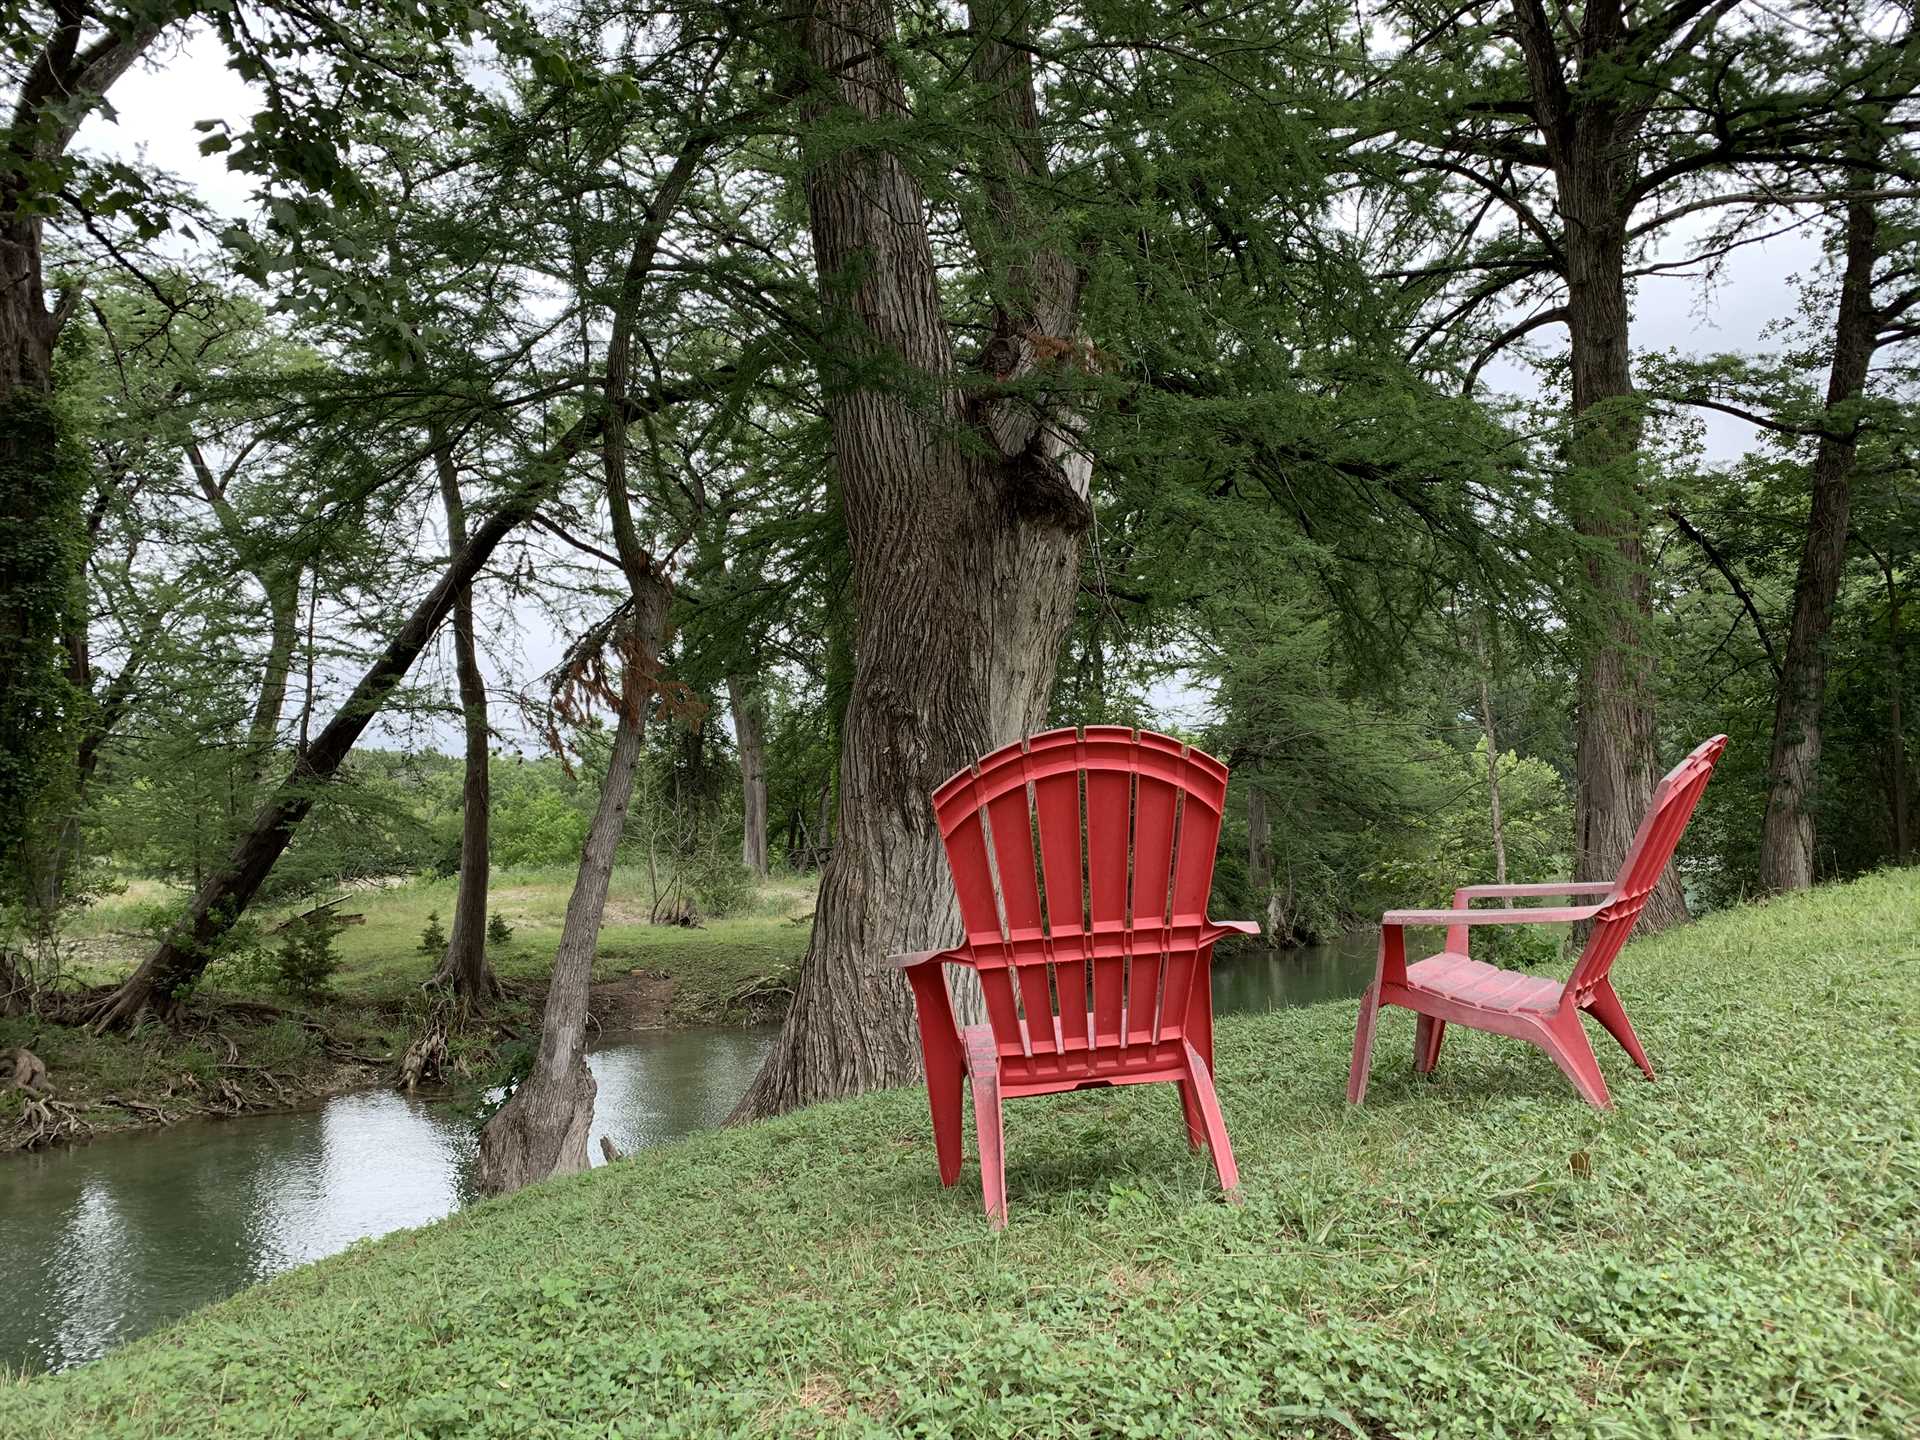                                                 The tree-lined Medina River is just the ticket to sit back and feel your tensions melt away.